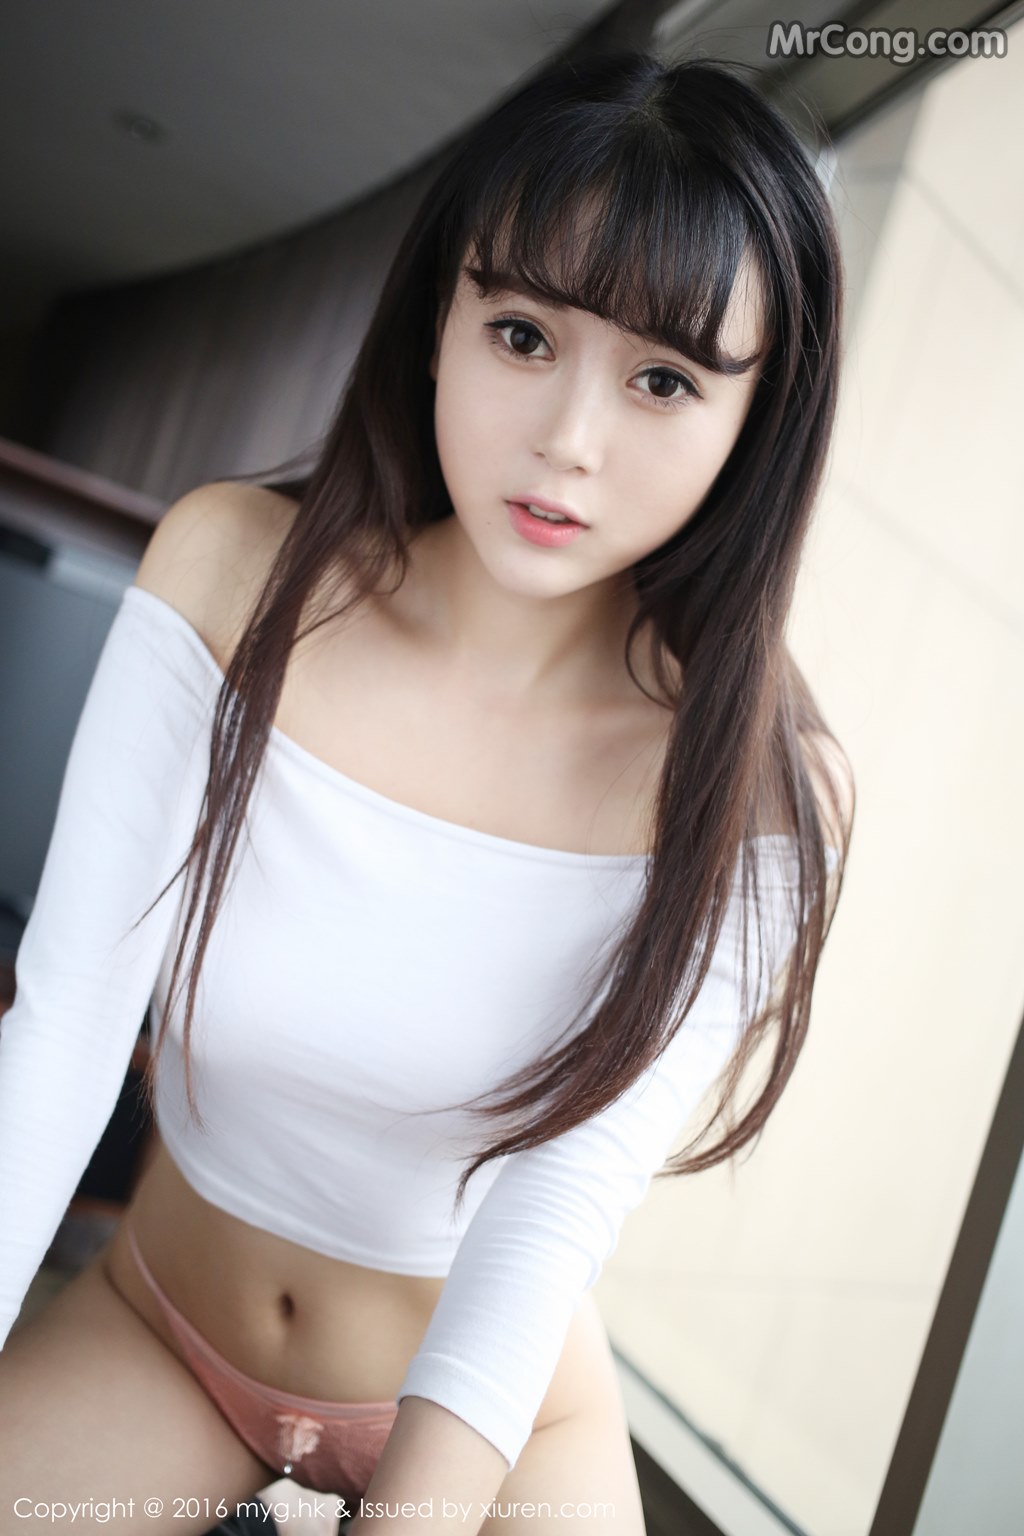 MyGirl Vol.197: Model Kitty Zhao Xiaomi (赵 小米) (66 pictures) photo 3-19